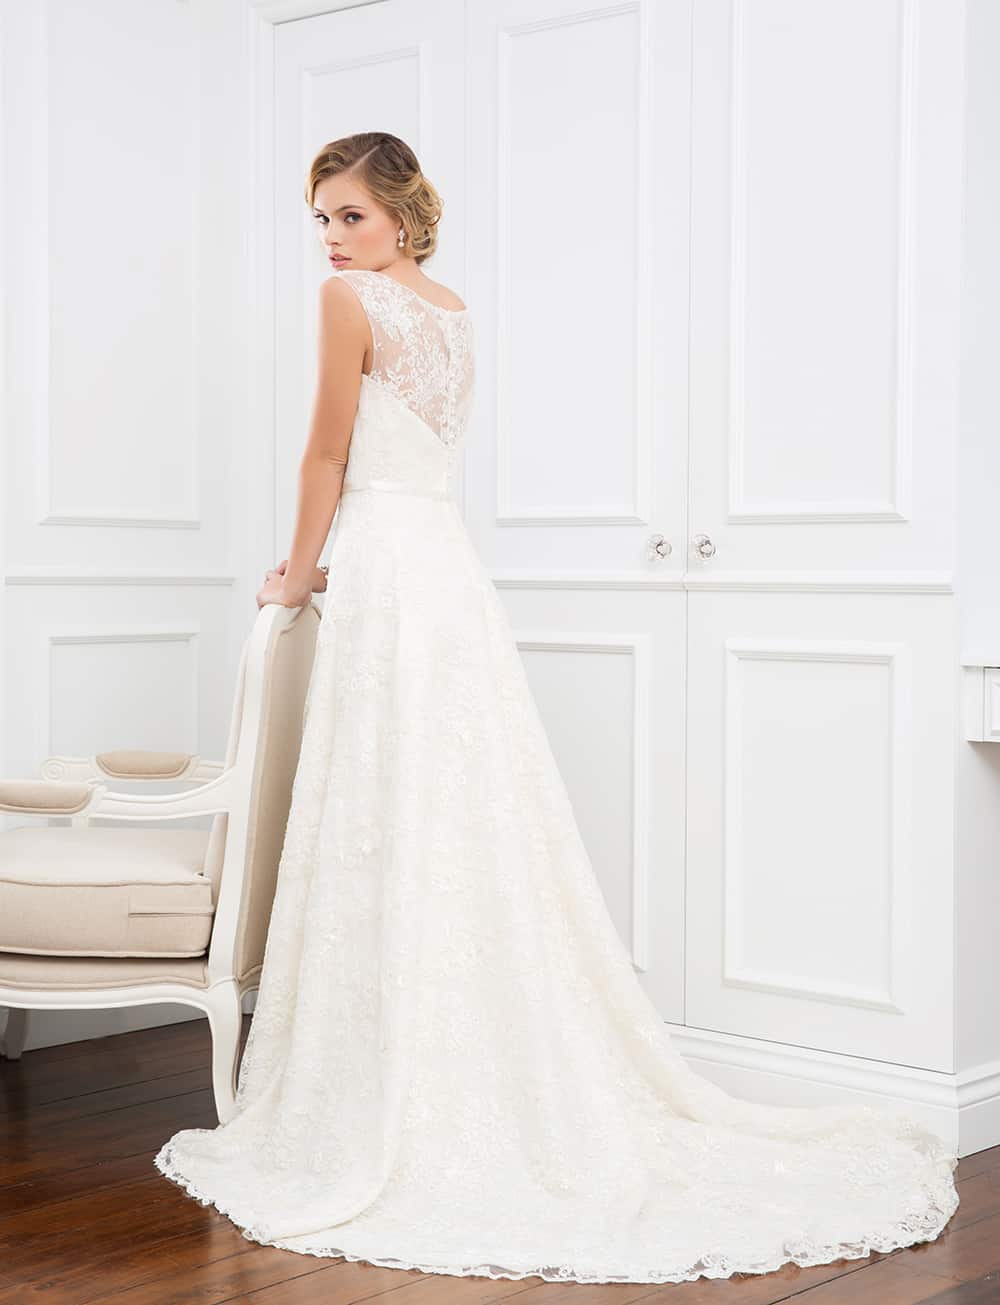 The Majelle gown with lace sheer back and lace train from Wendy Makin Couture.